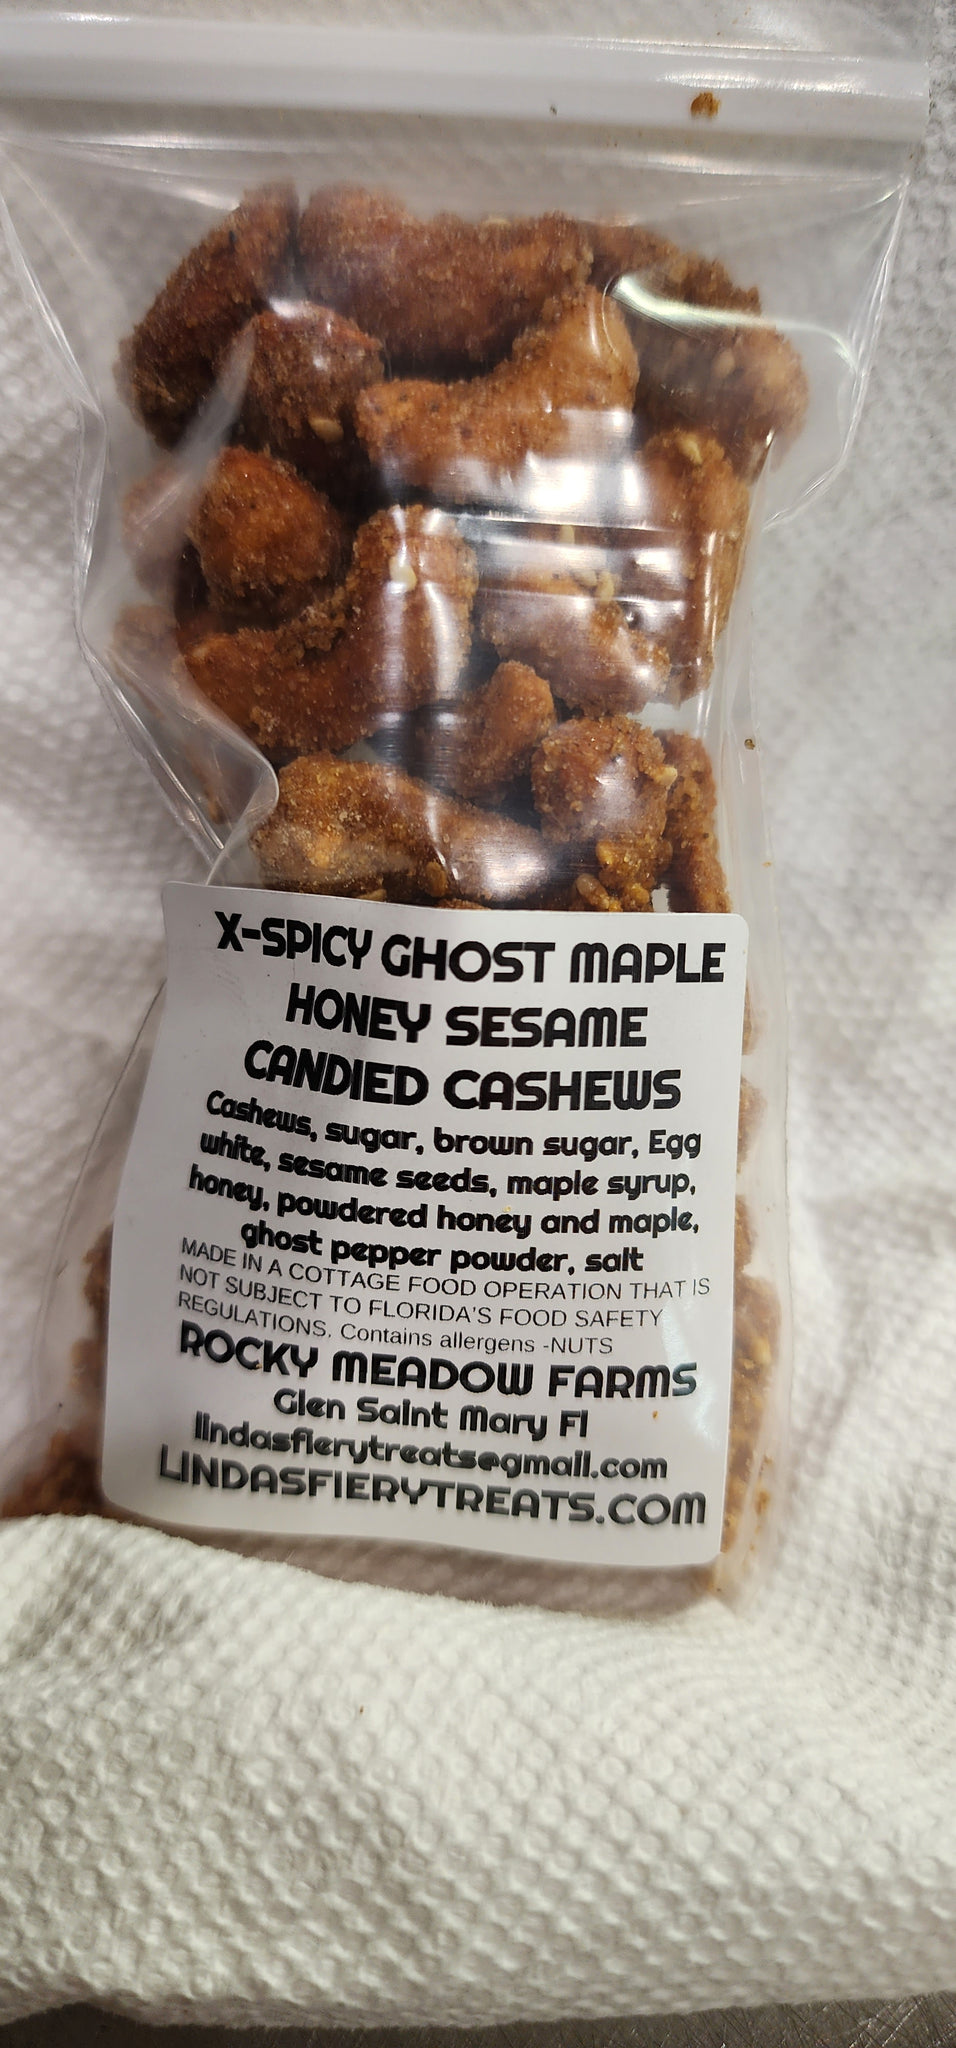 NUTS - Ghost maple honey sesame candied cashews